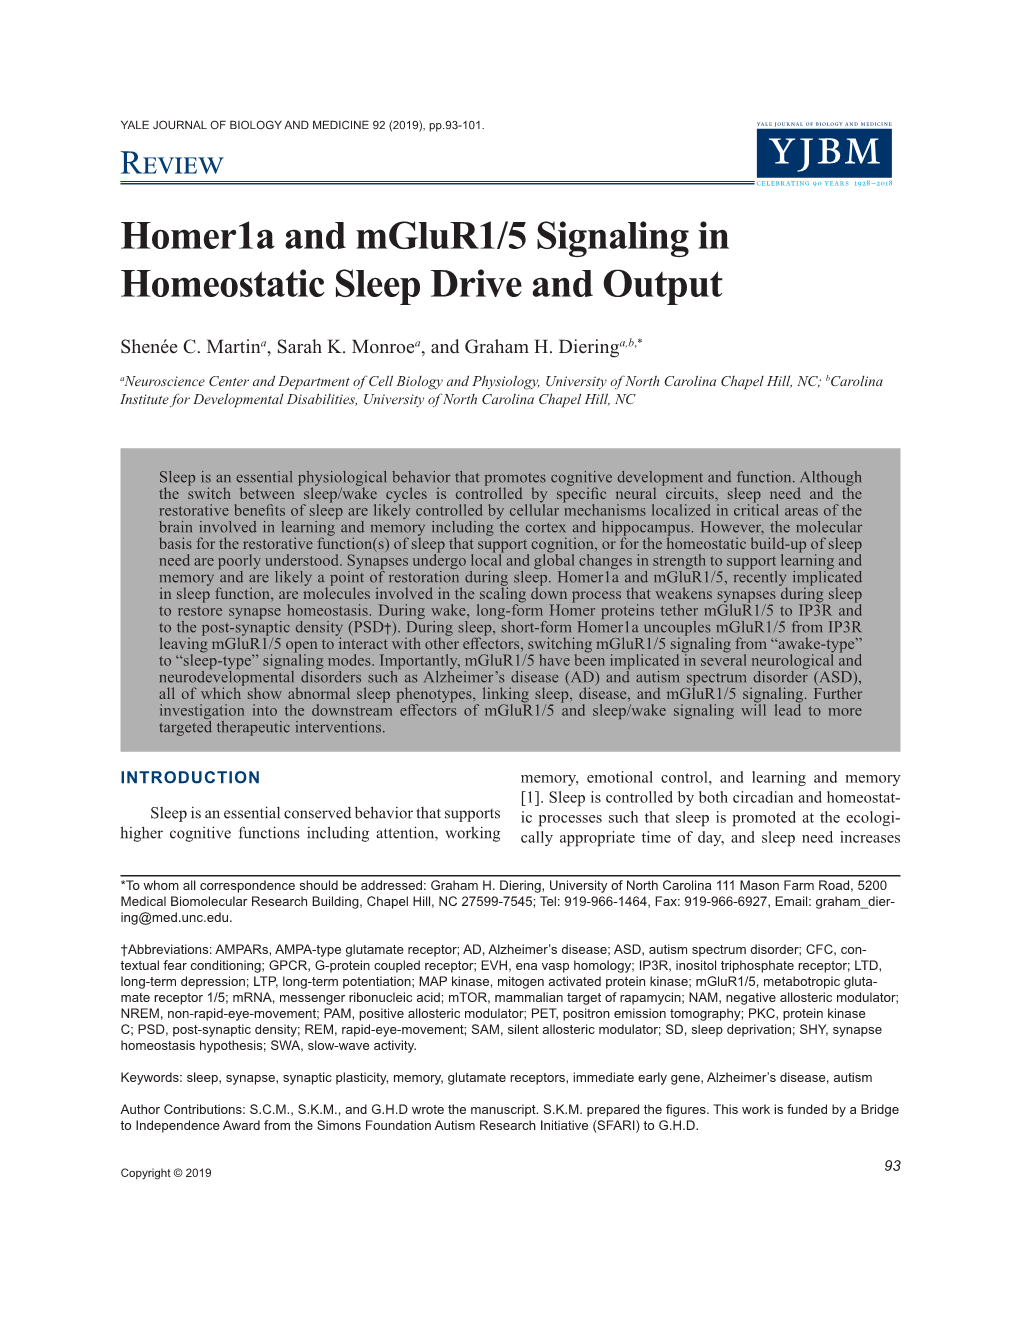 Homer1a and Mglur1/5 Signaling in Homeostatic Sleep Drive and Output